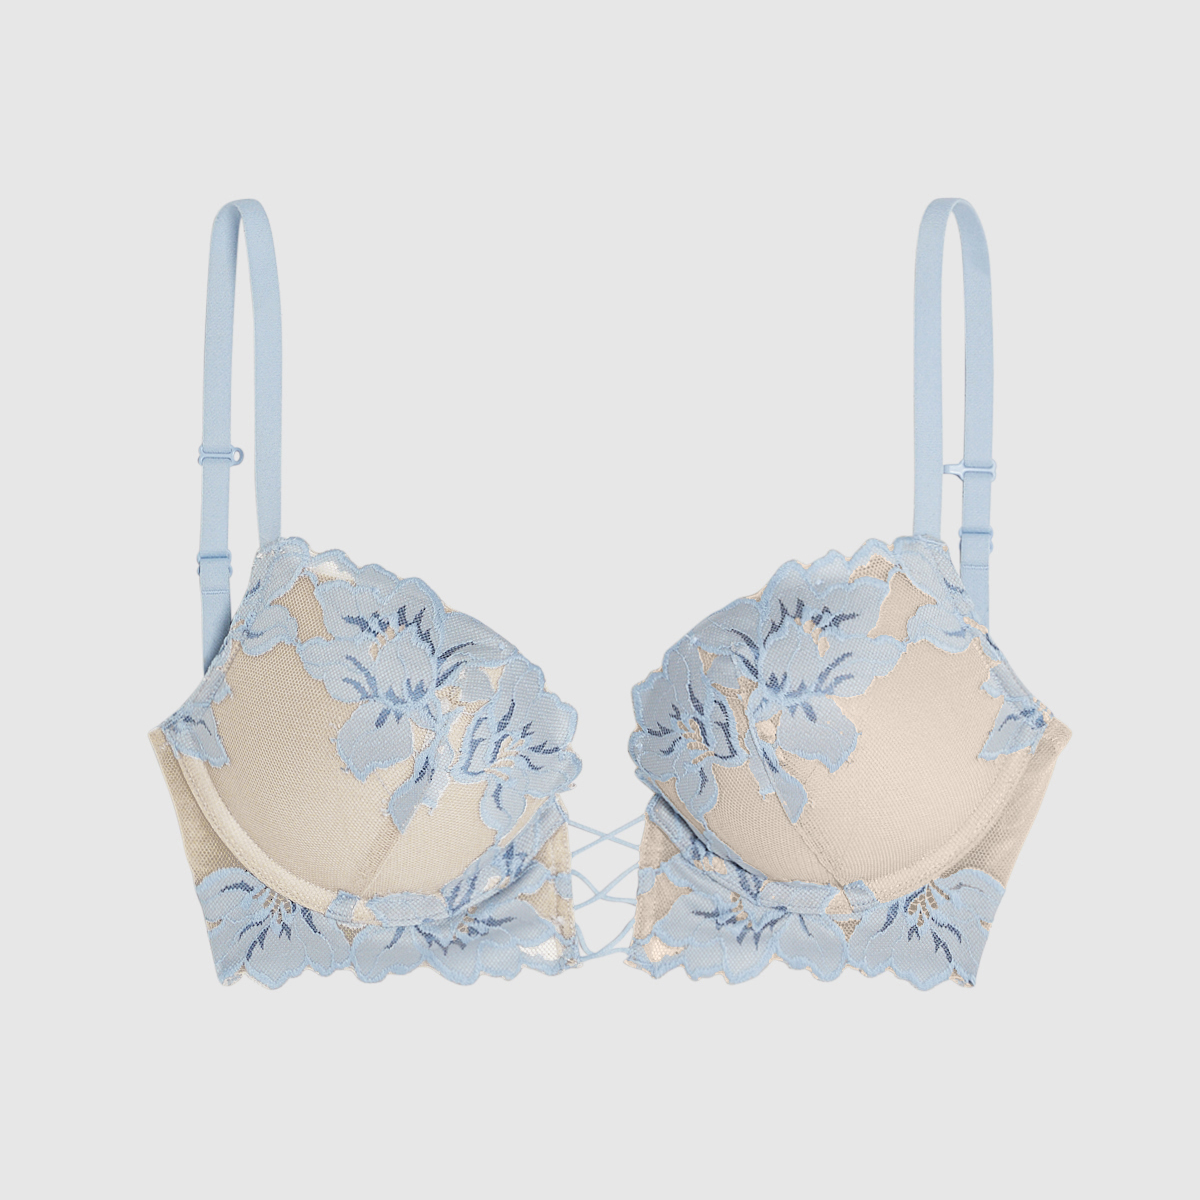 Buy Victoria's Secret Majorelle Blue Lace Push Up Bra from Next Luxembourg